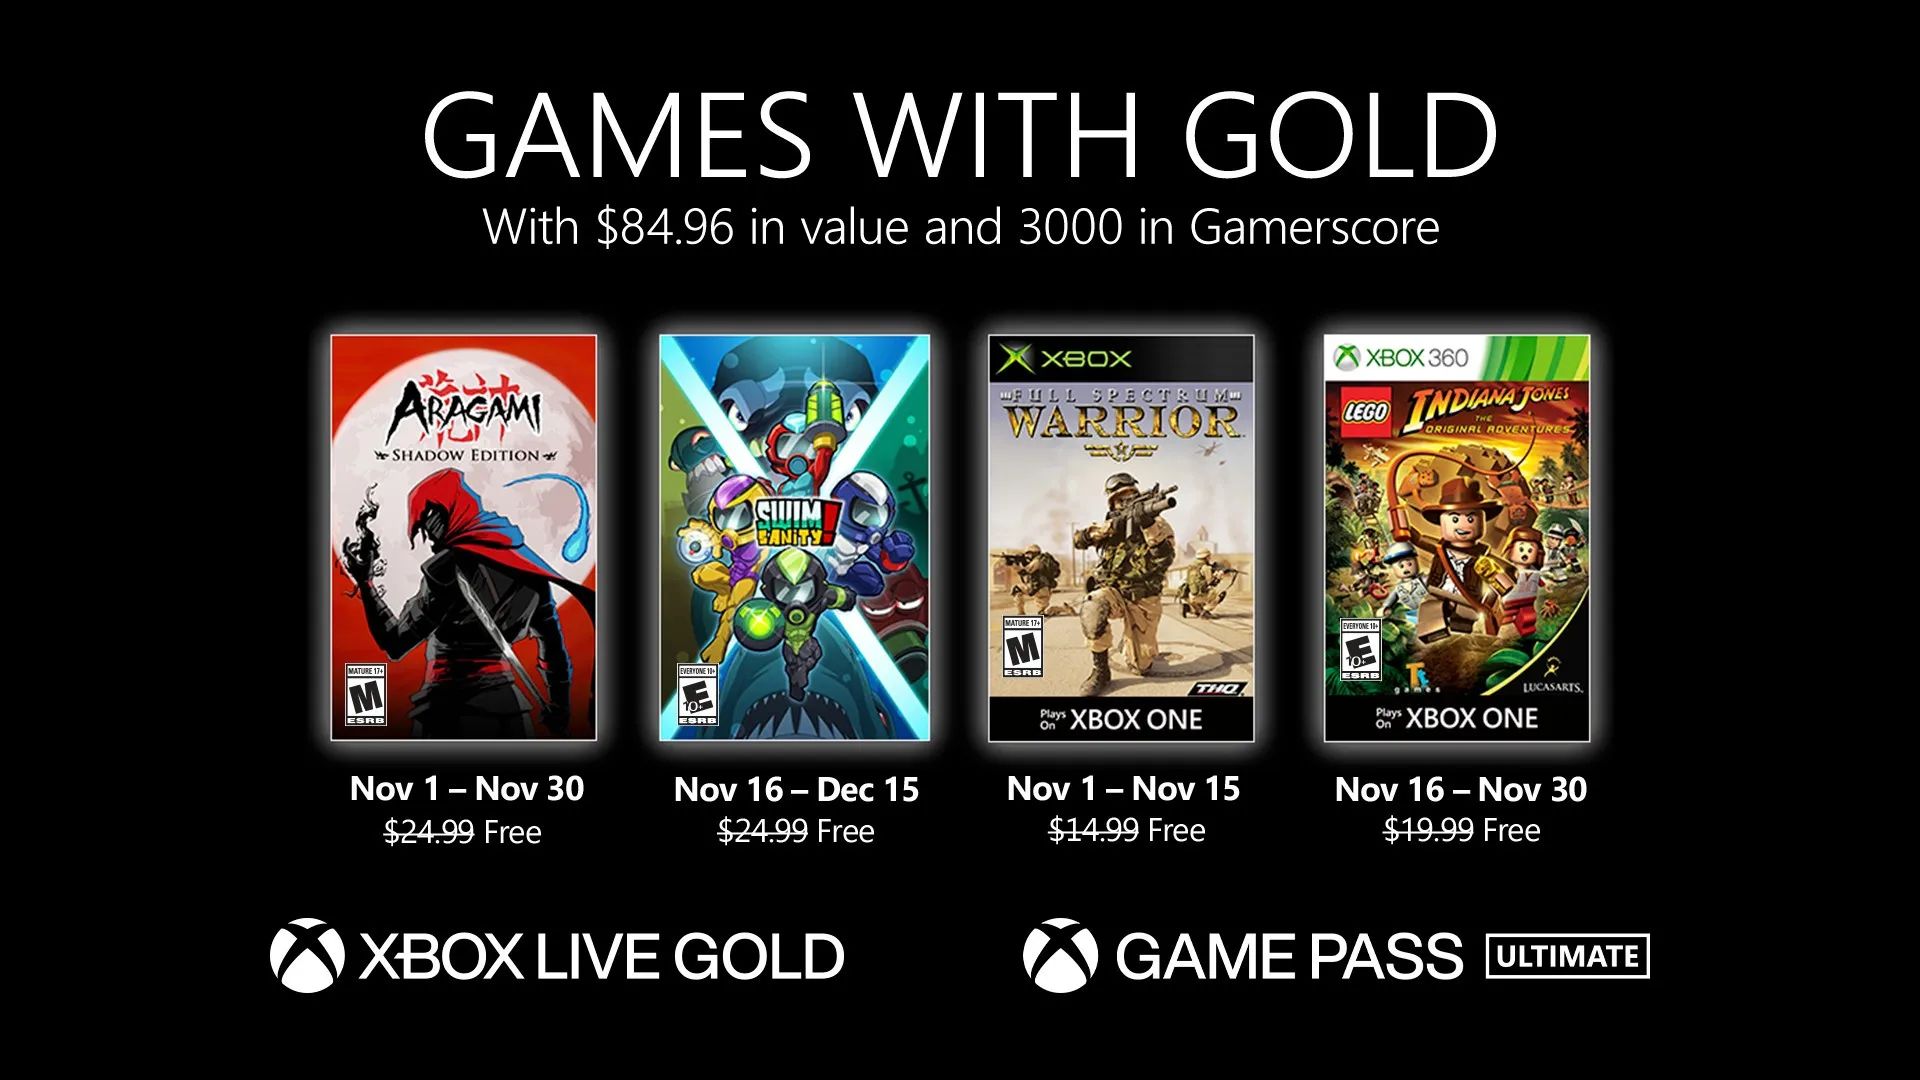 How To Download Games With Gold On Xbox One